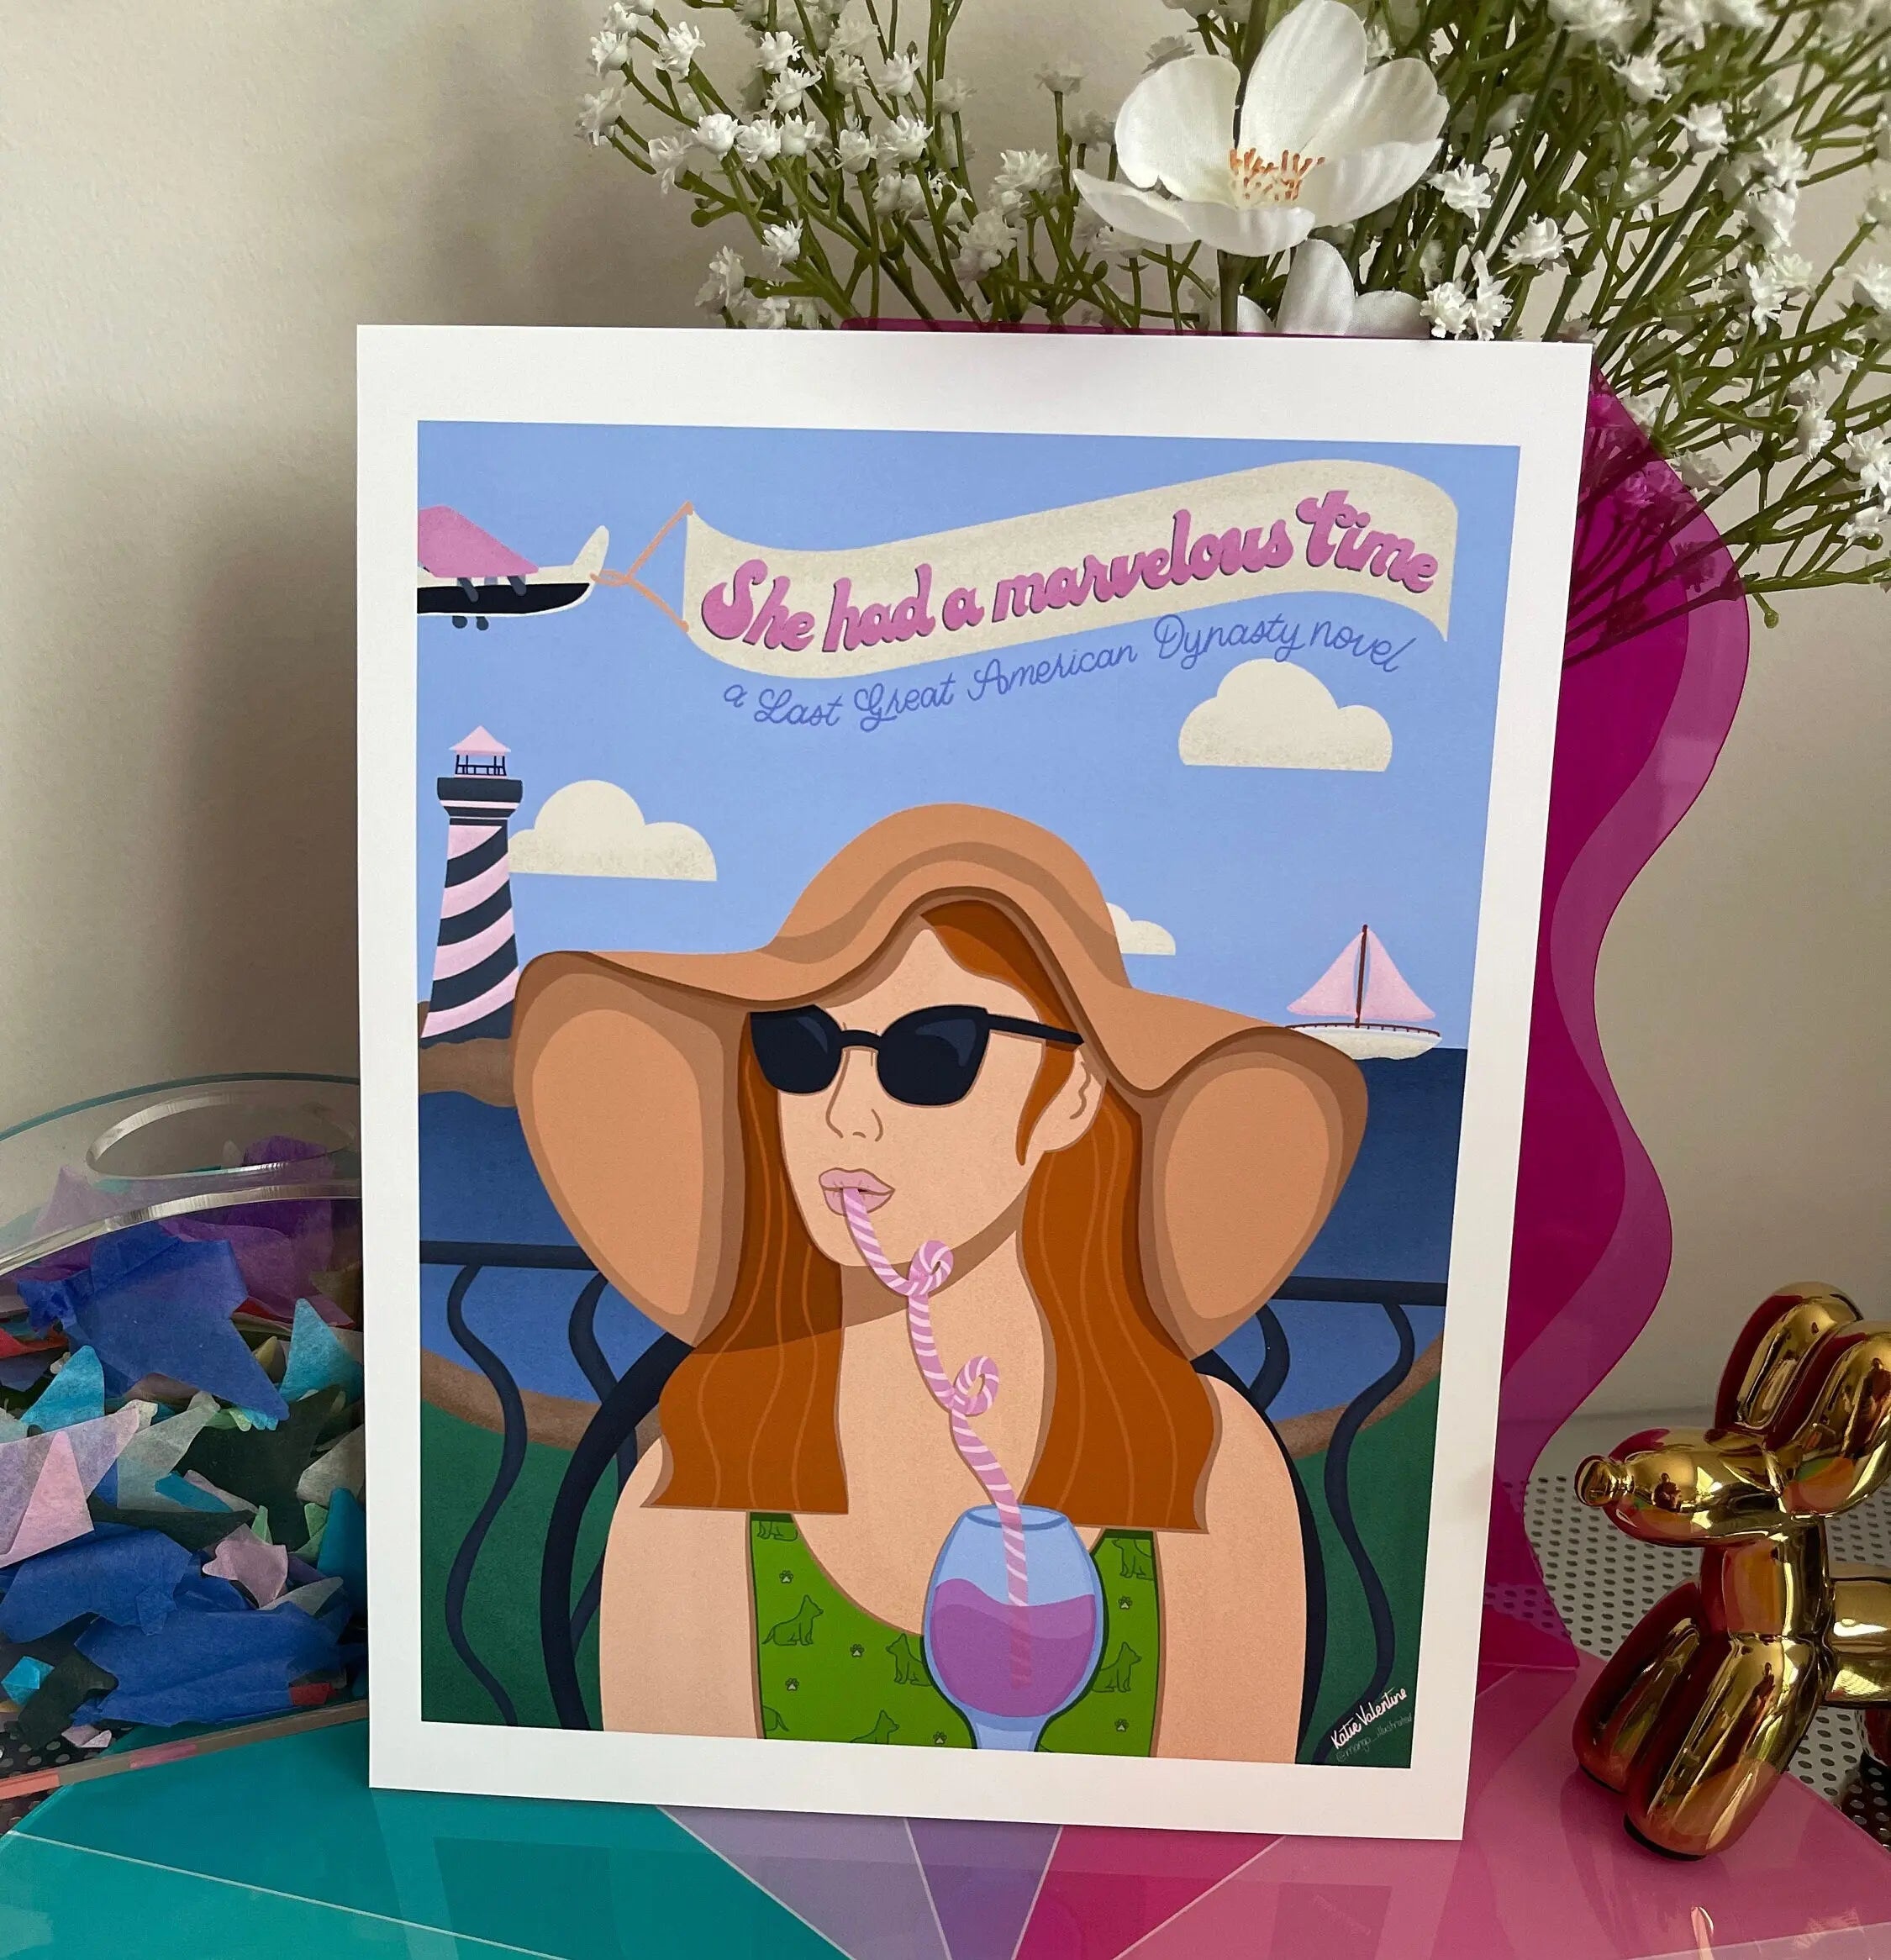 She Had a Marvelous Time art print MangoIllustrated